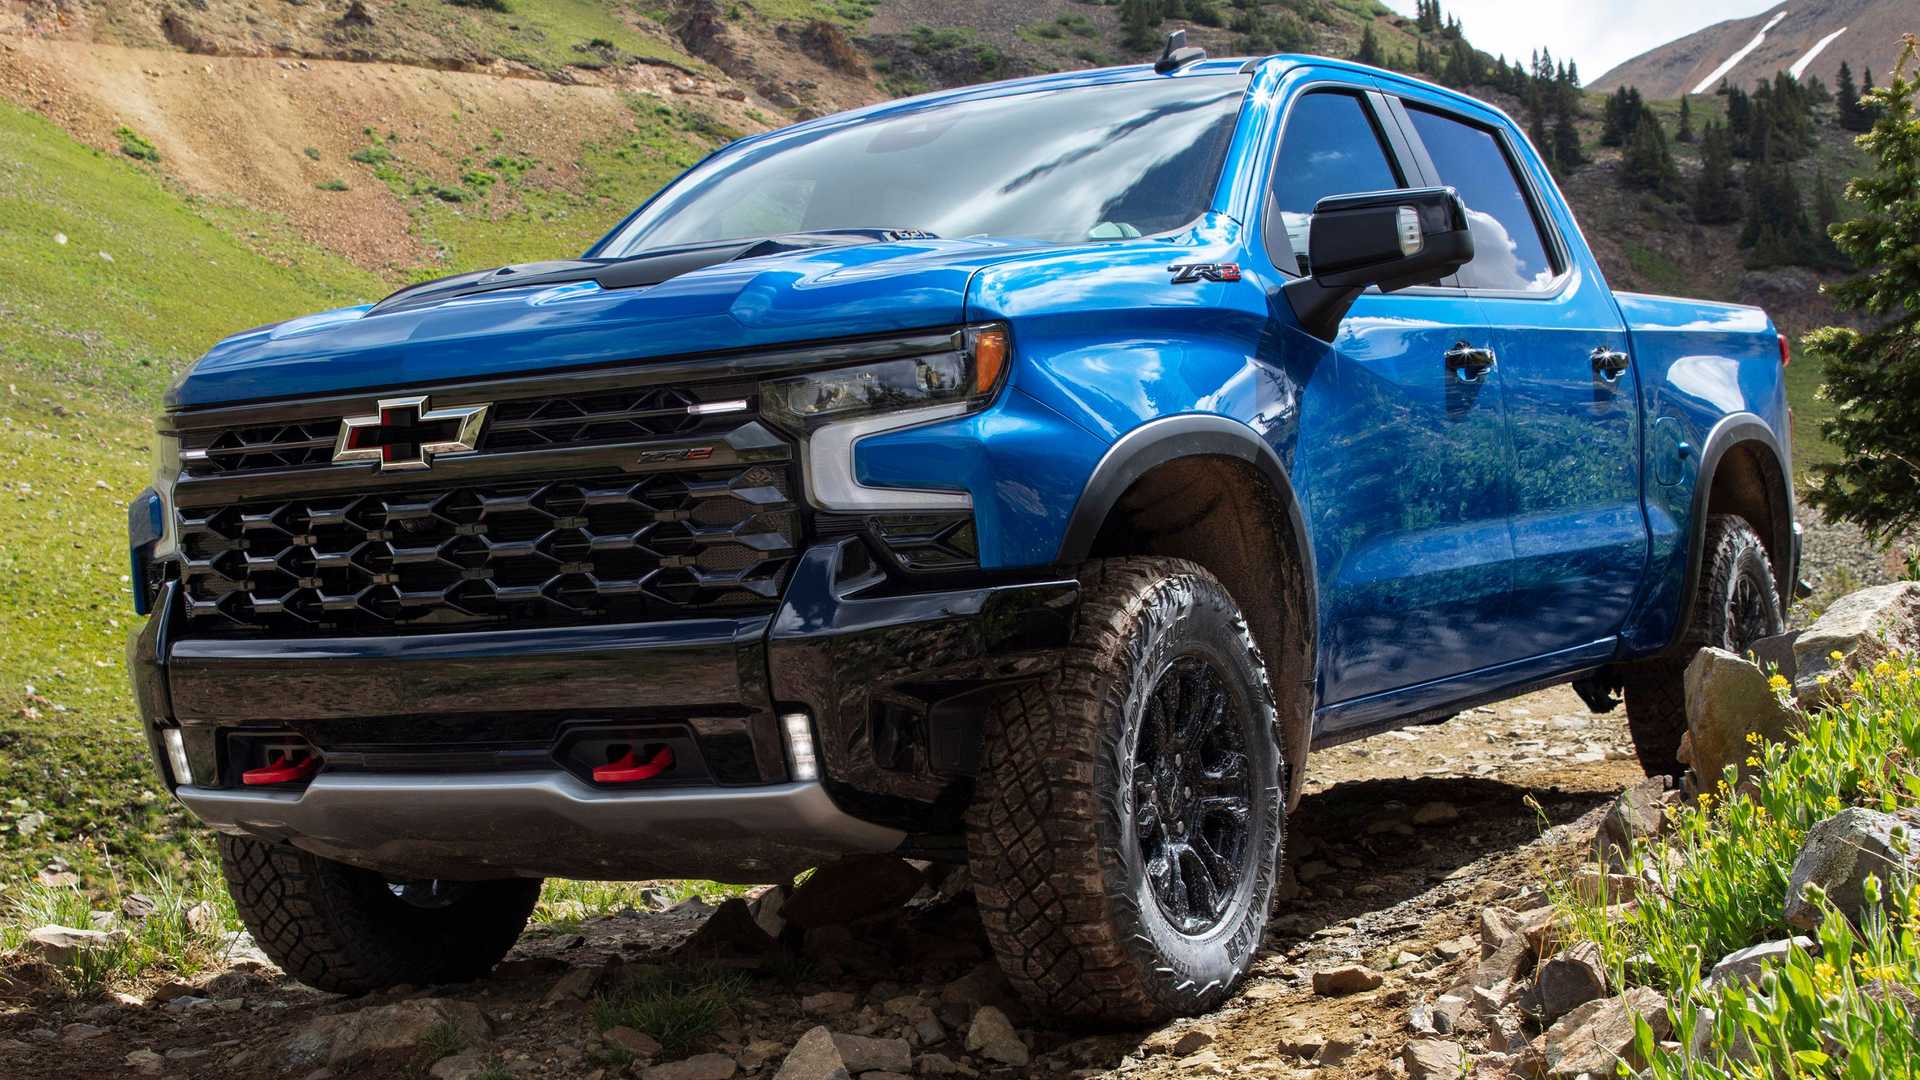 2022 Chevy Silverado Debuts With New Styling, Off Road ZR2 Model